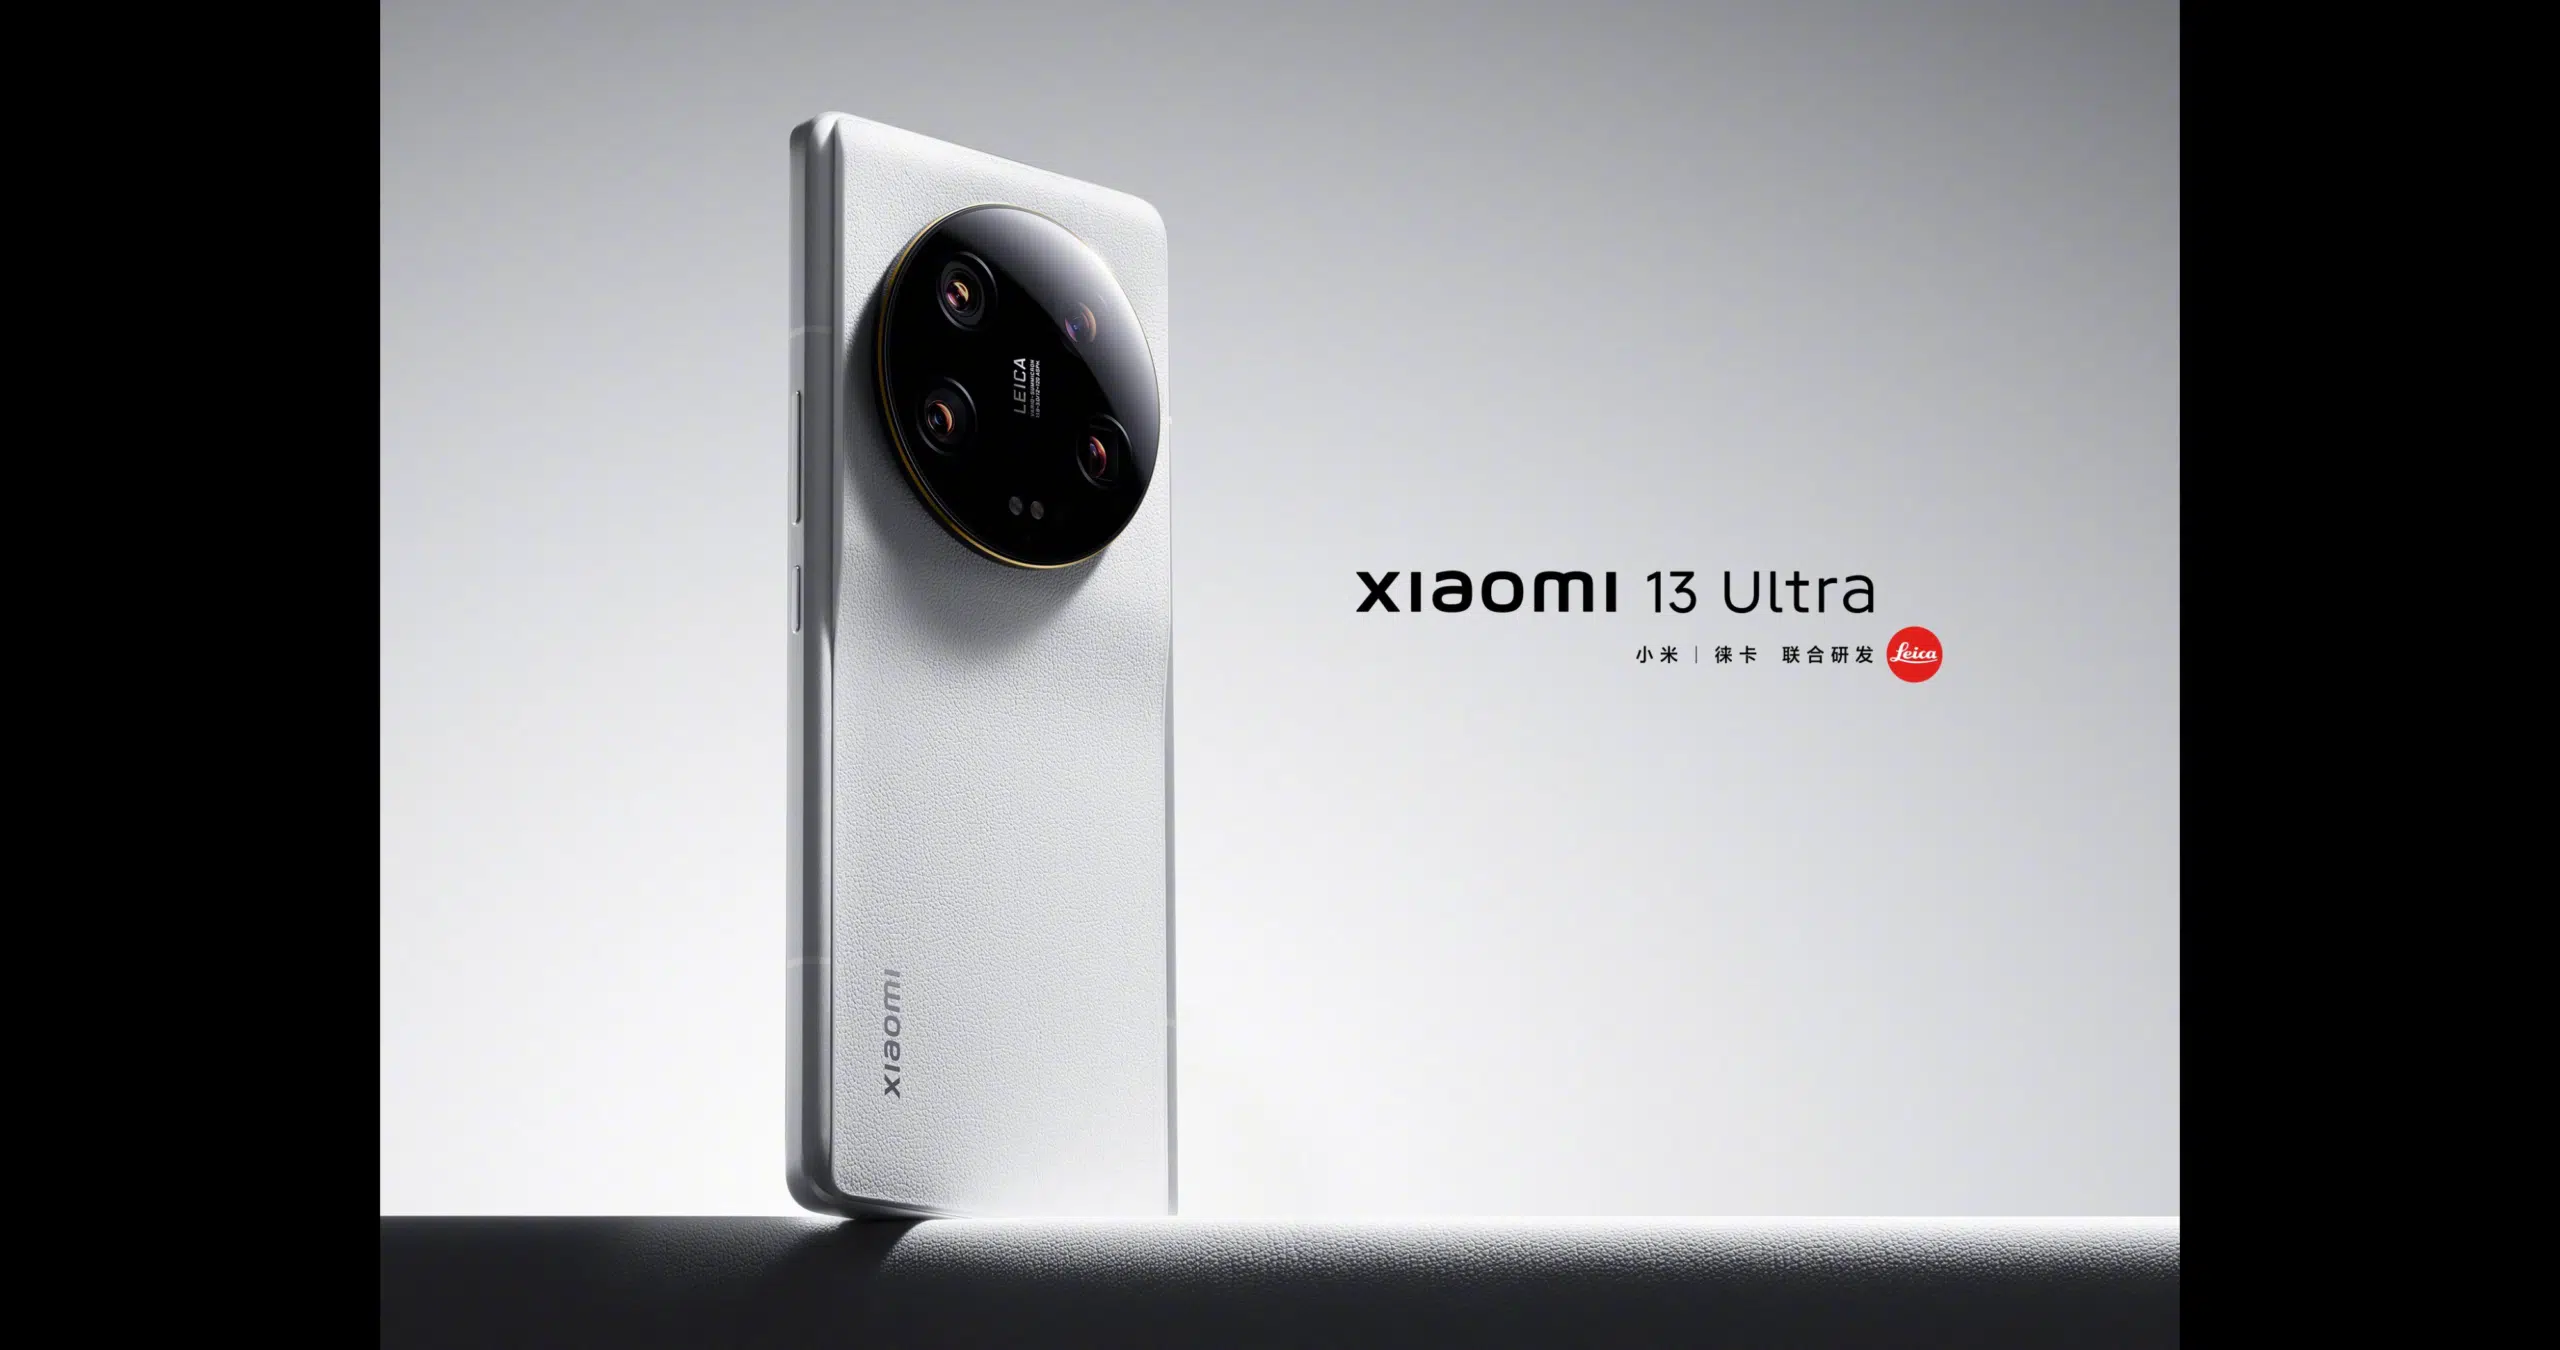 Xiaomi 13 Ultra is launching Globally on April 18th